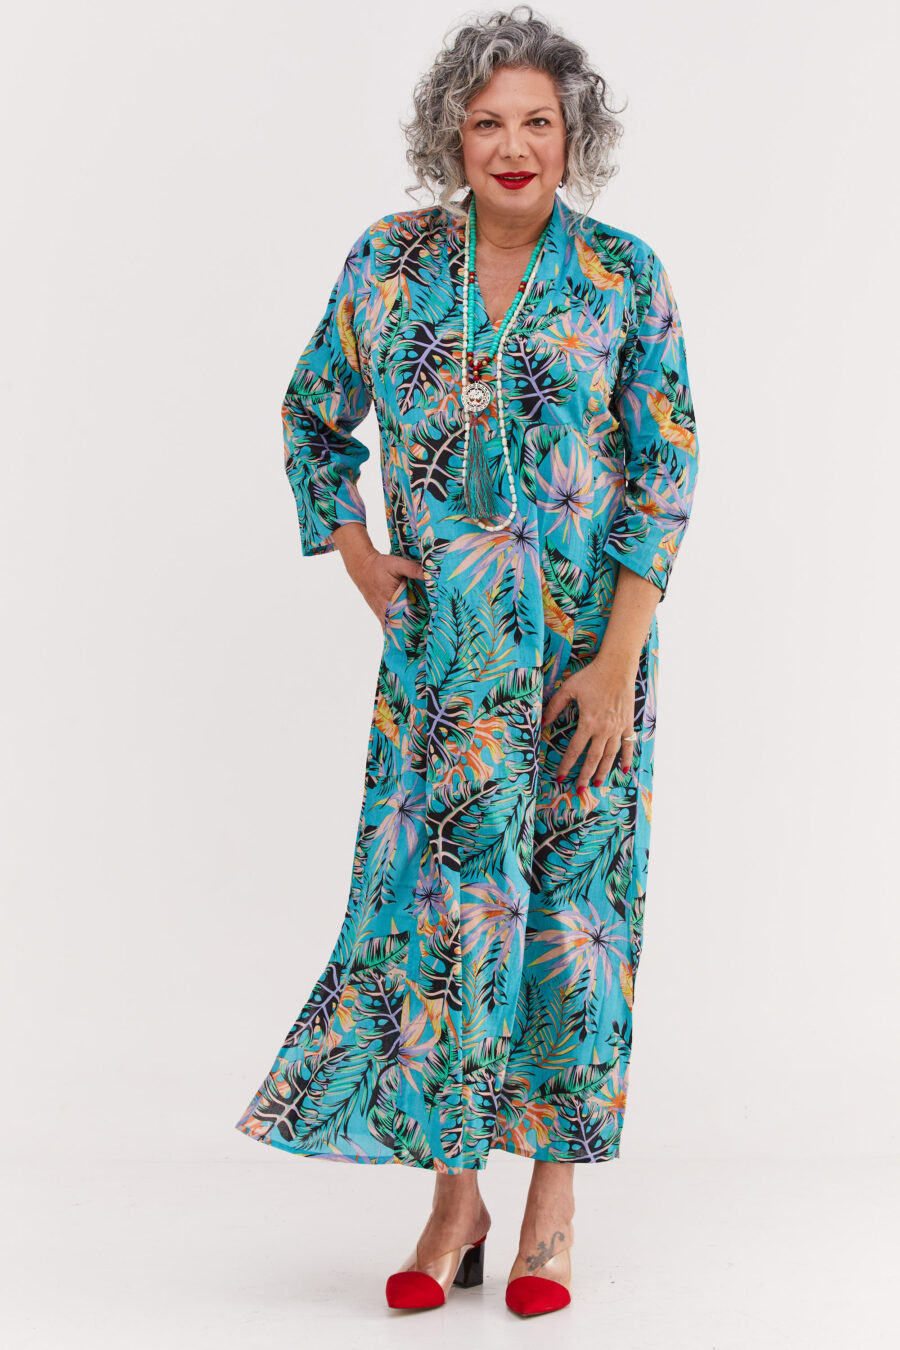 Jalabiya dress | Uniquely designed dress - Tropical sunrise print, tourquise dress with tropical print in sunrise colours by comfort zone boutique